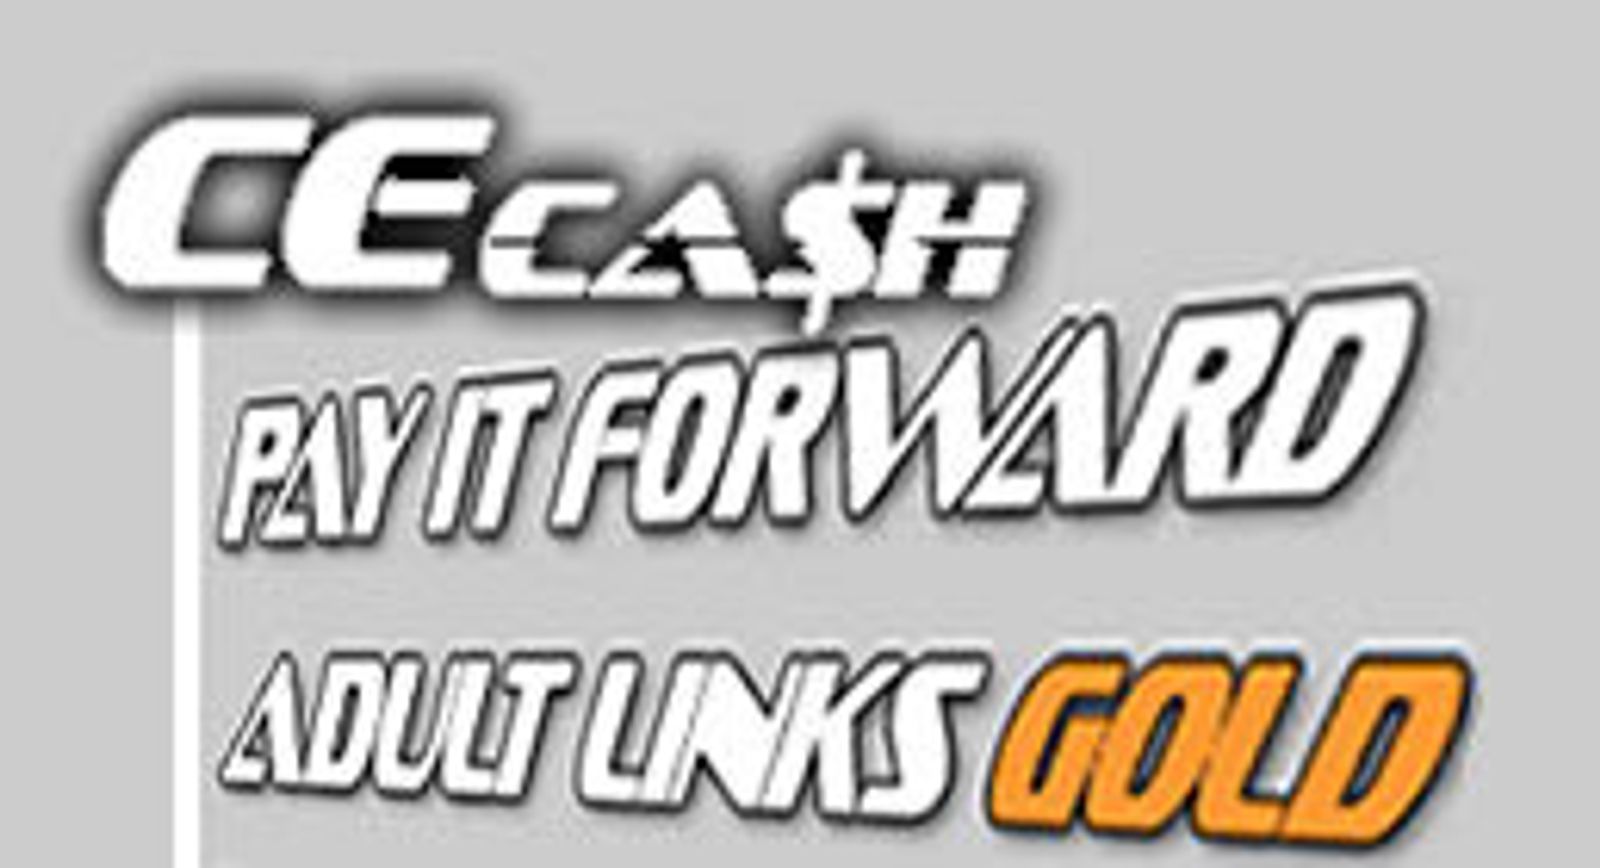 Adult Links Gold, Mags Links, ''Pay It Forward'' Roll: CECash